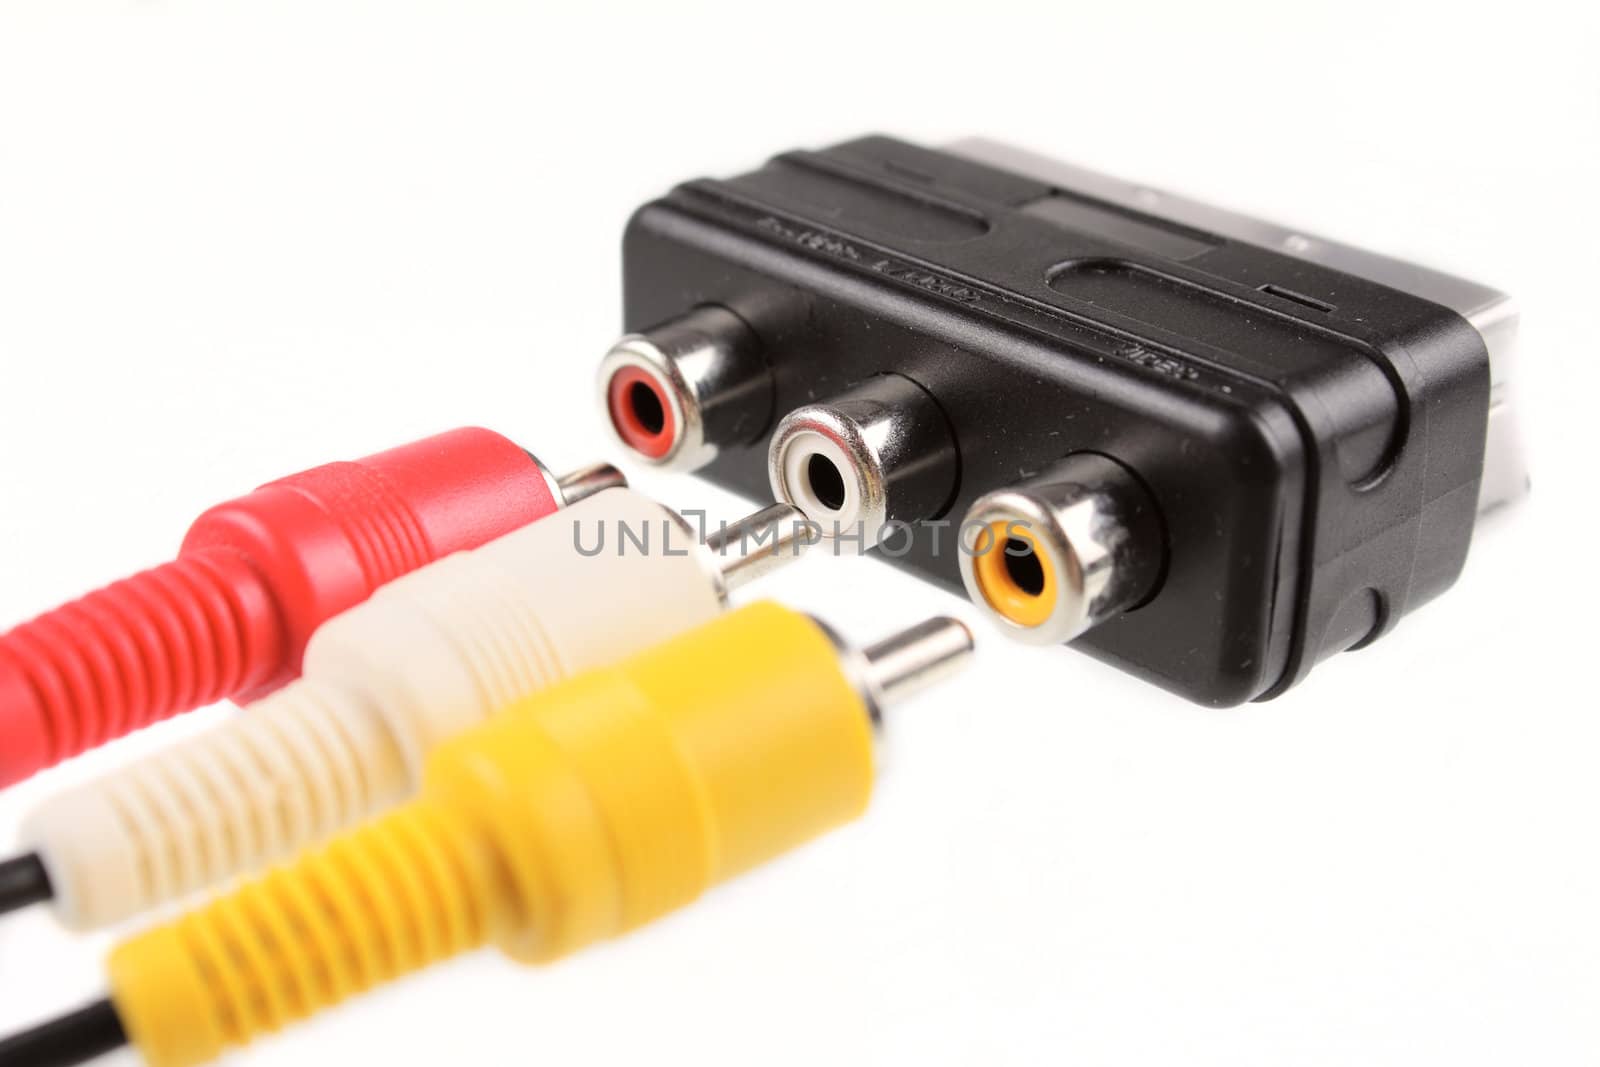 SCART and RCA connectors by Incarnatus